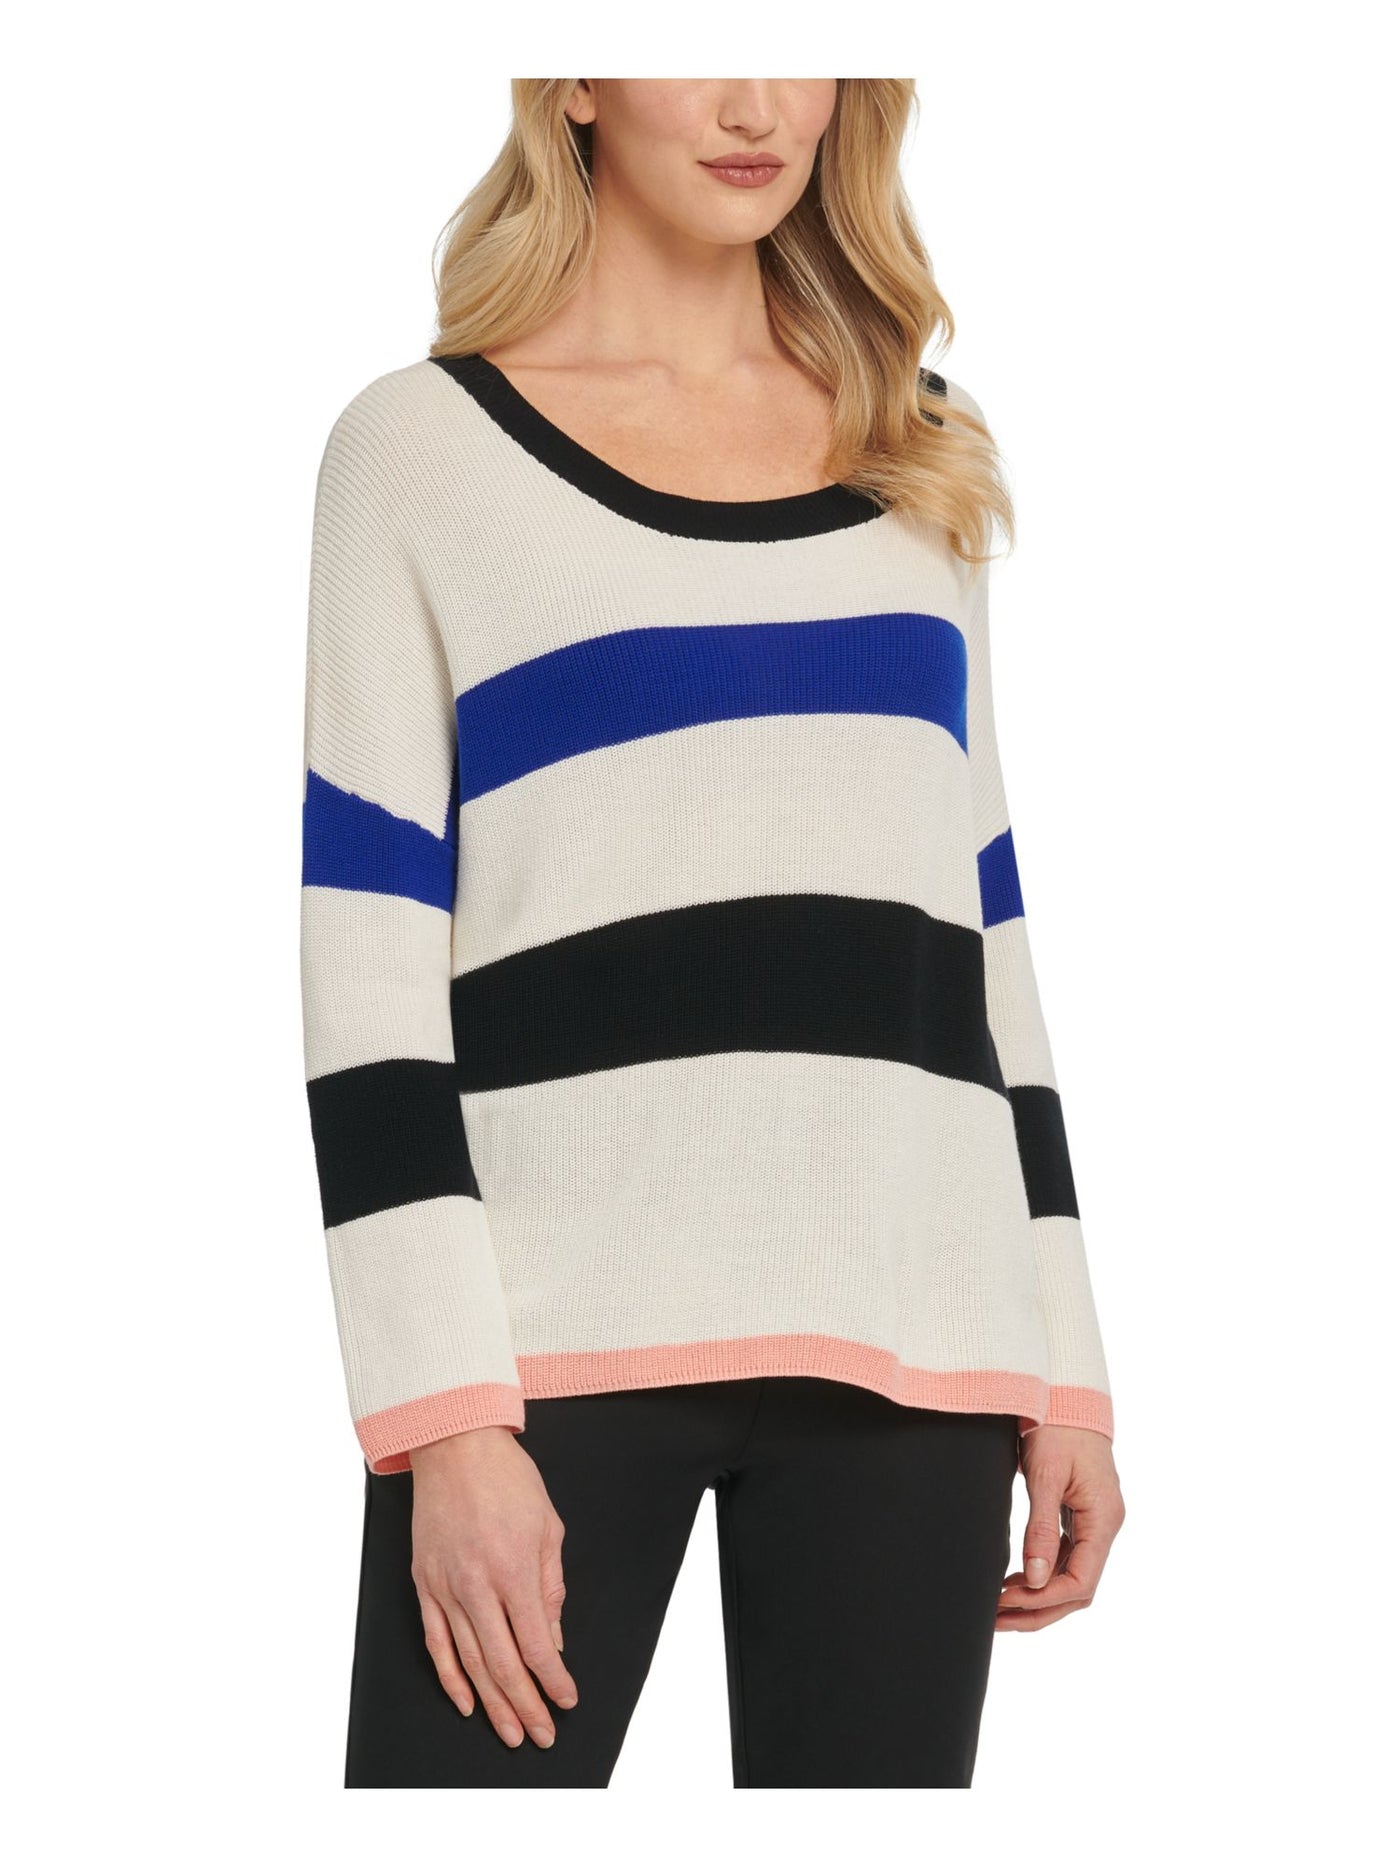 DKNY Womens White Ribbed Color Block Long Sleeve Scoop Neck Sweater S